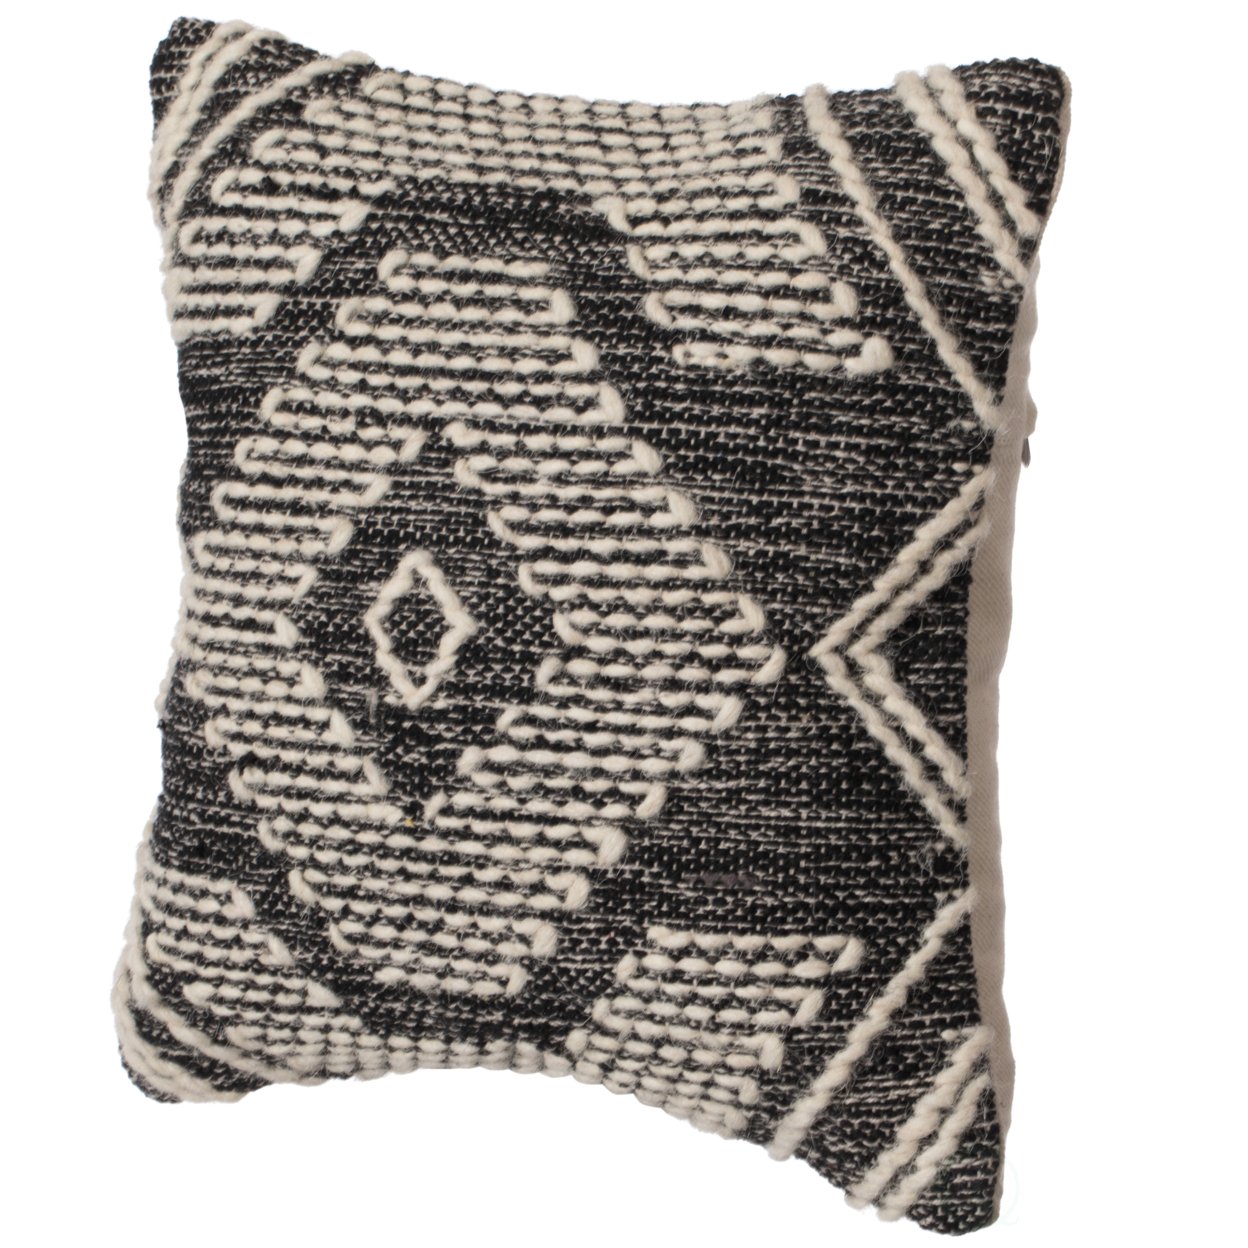 16 Throw Pillow Cover With White On Black Tribal Pattern And Corner Tassels, Black & White - Pillowcase With Cushion